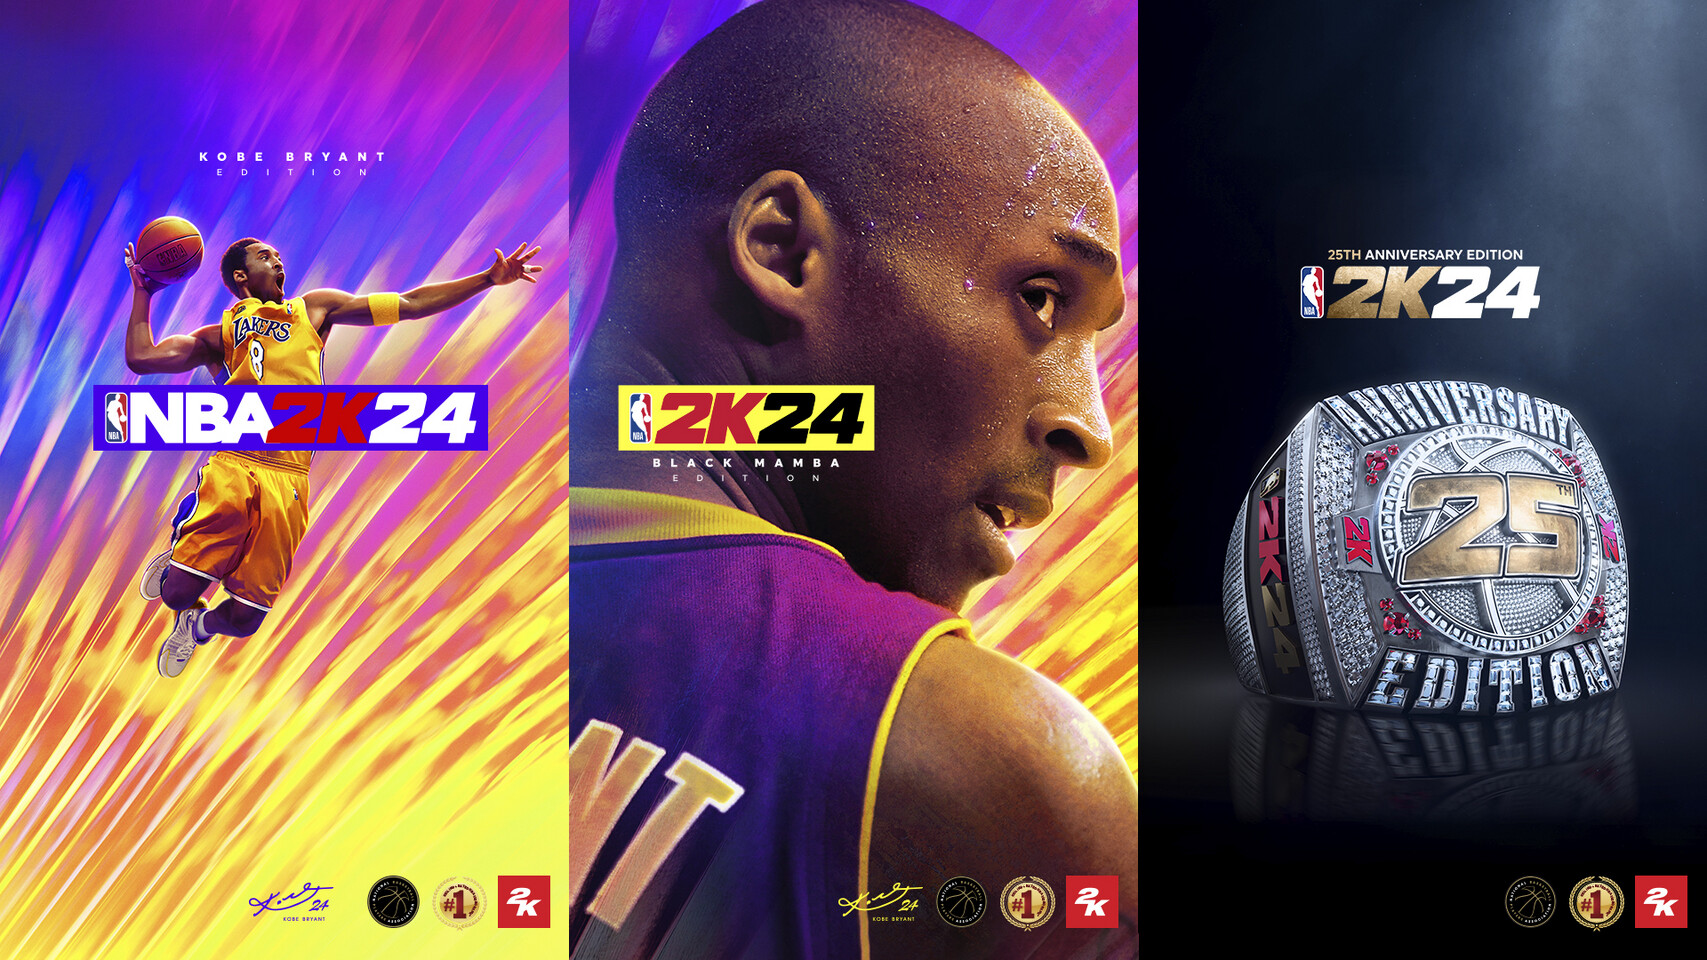 NBA 2K24 secures the record of worst rated game of steam! : r/Steam